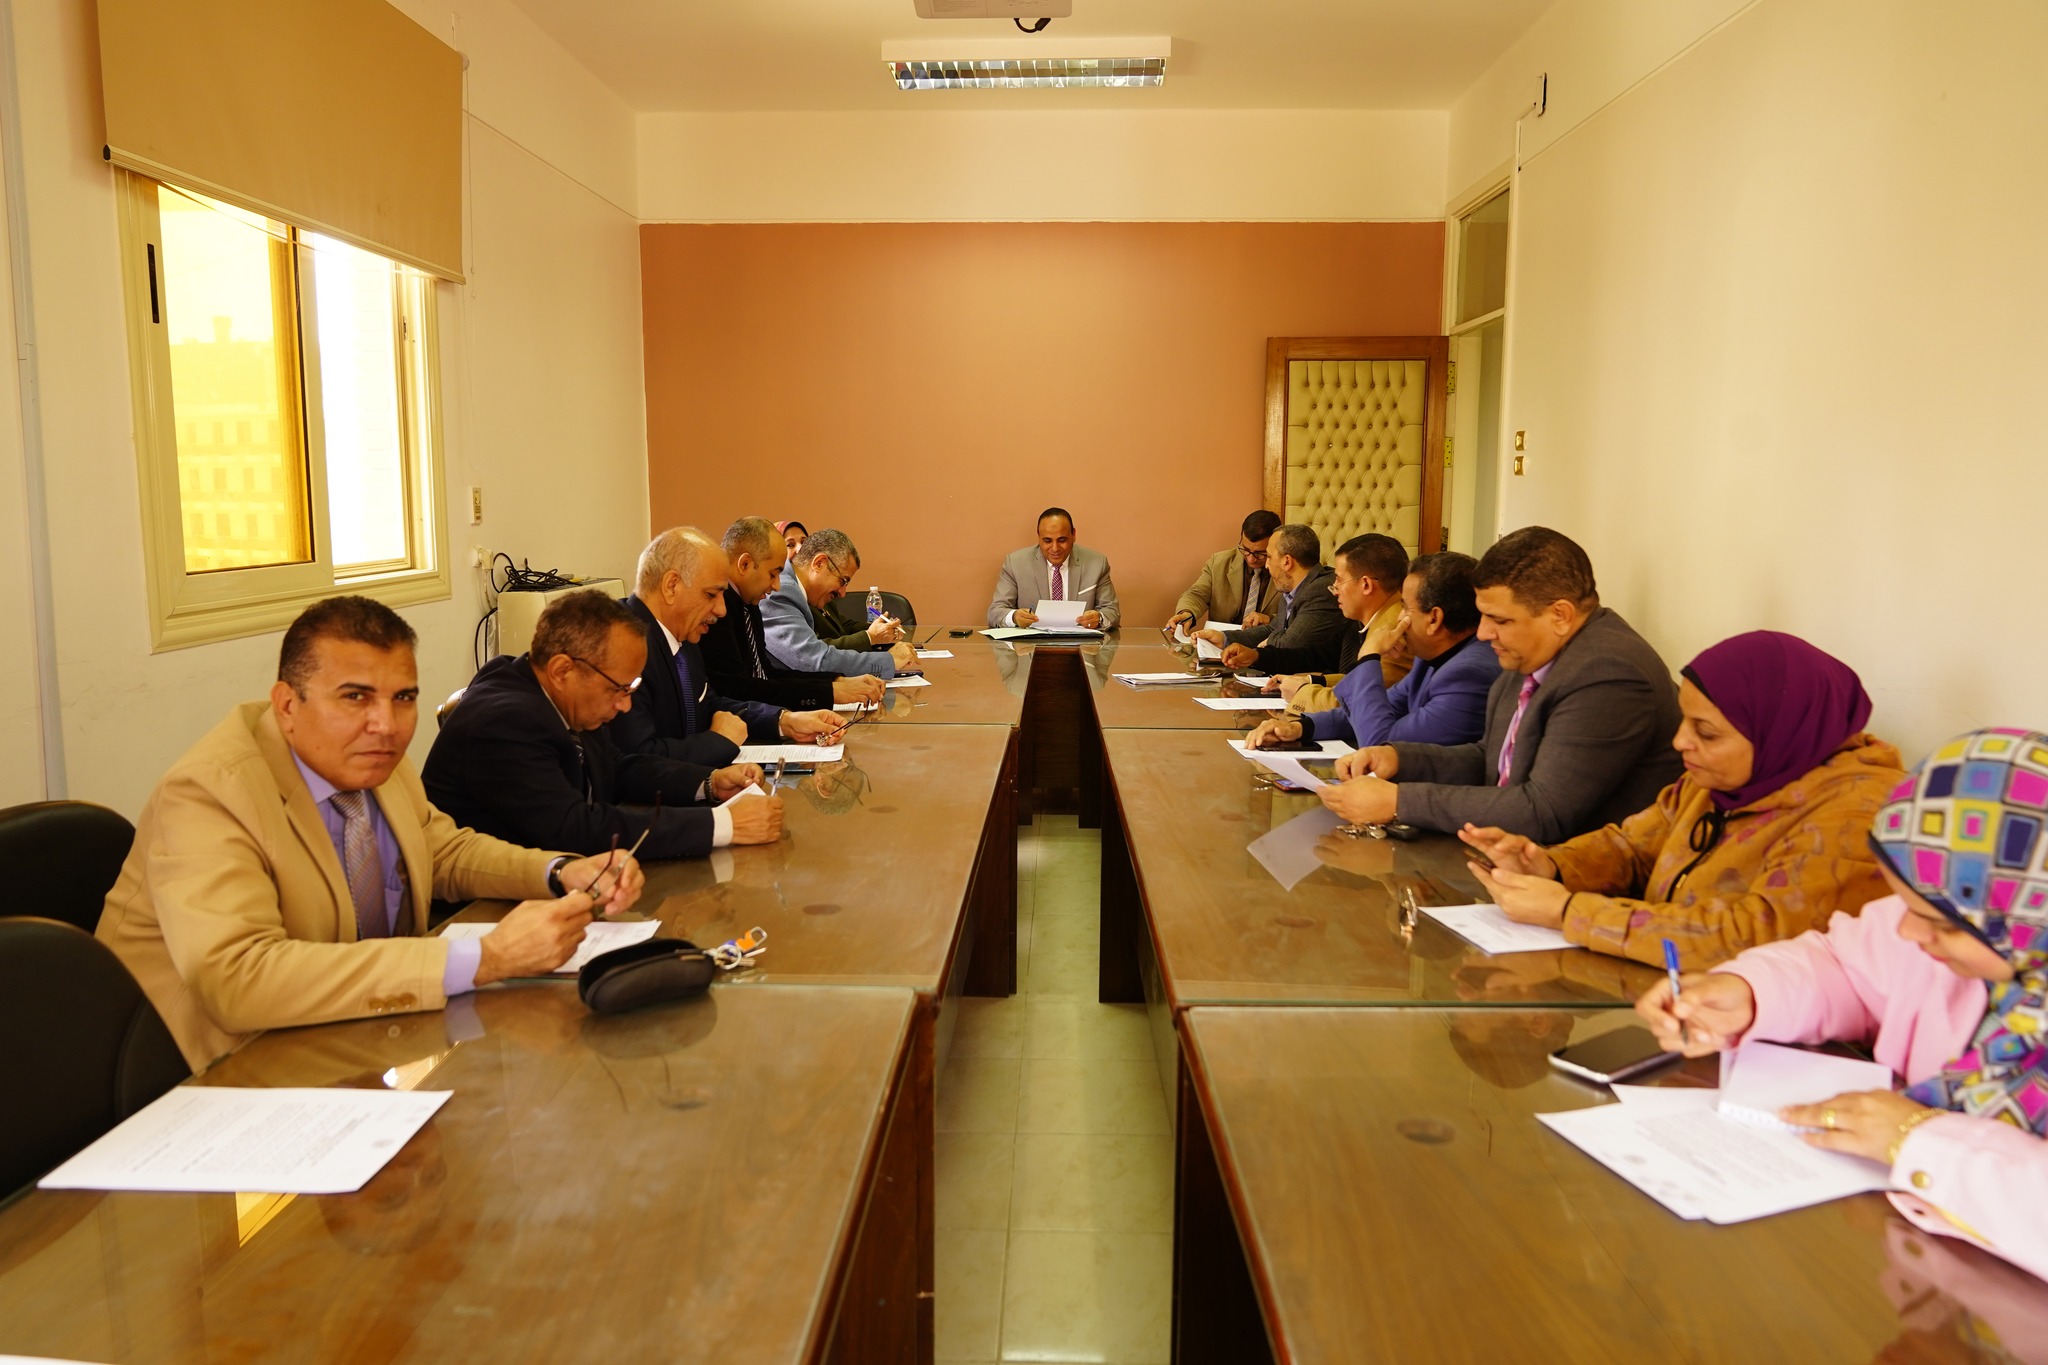 The Meeting of the Council is held, Headed by Prof. Khaled Abdel Latif Omran, Vice President of the University for of Environmental Affairs and Community Service